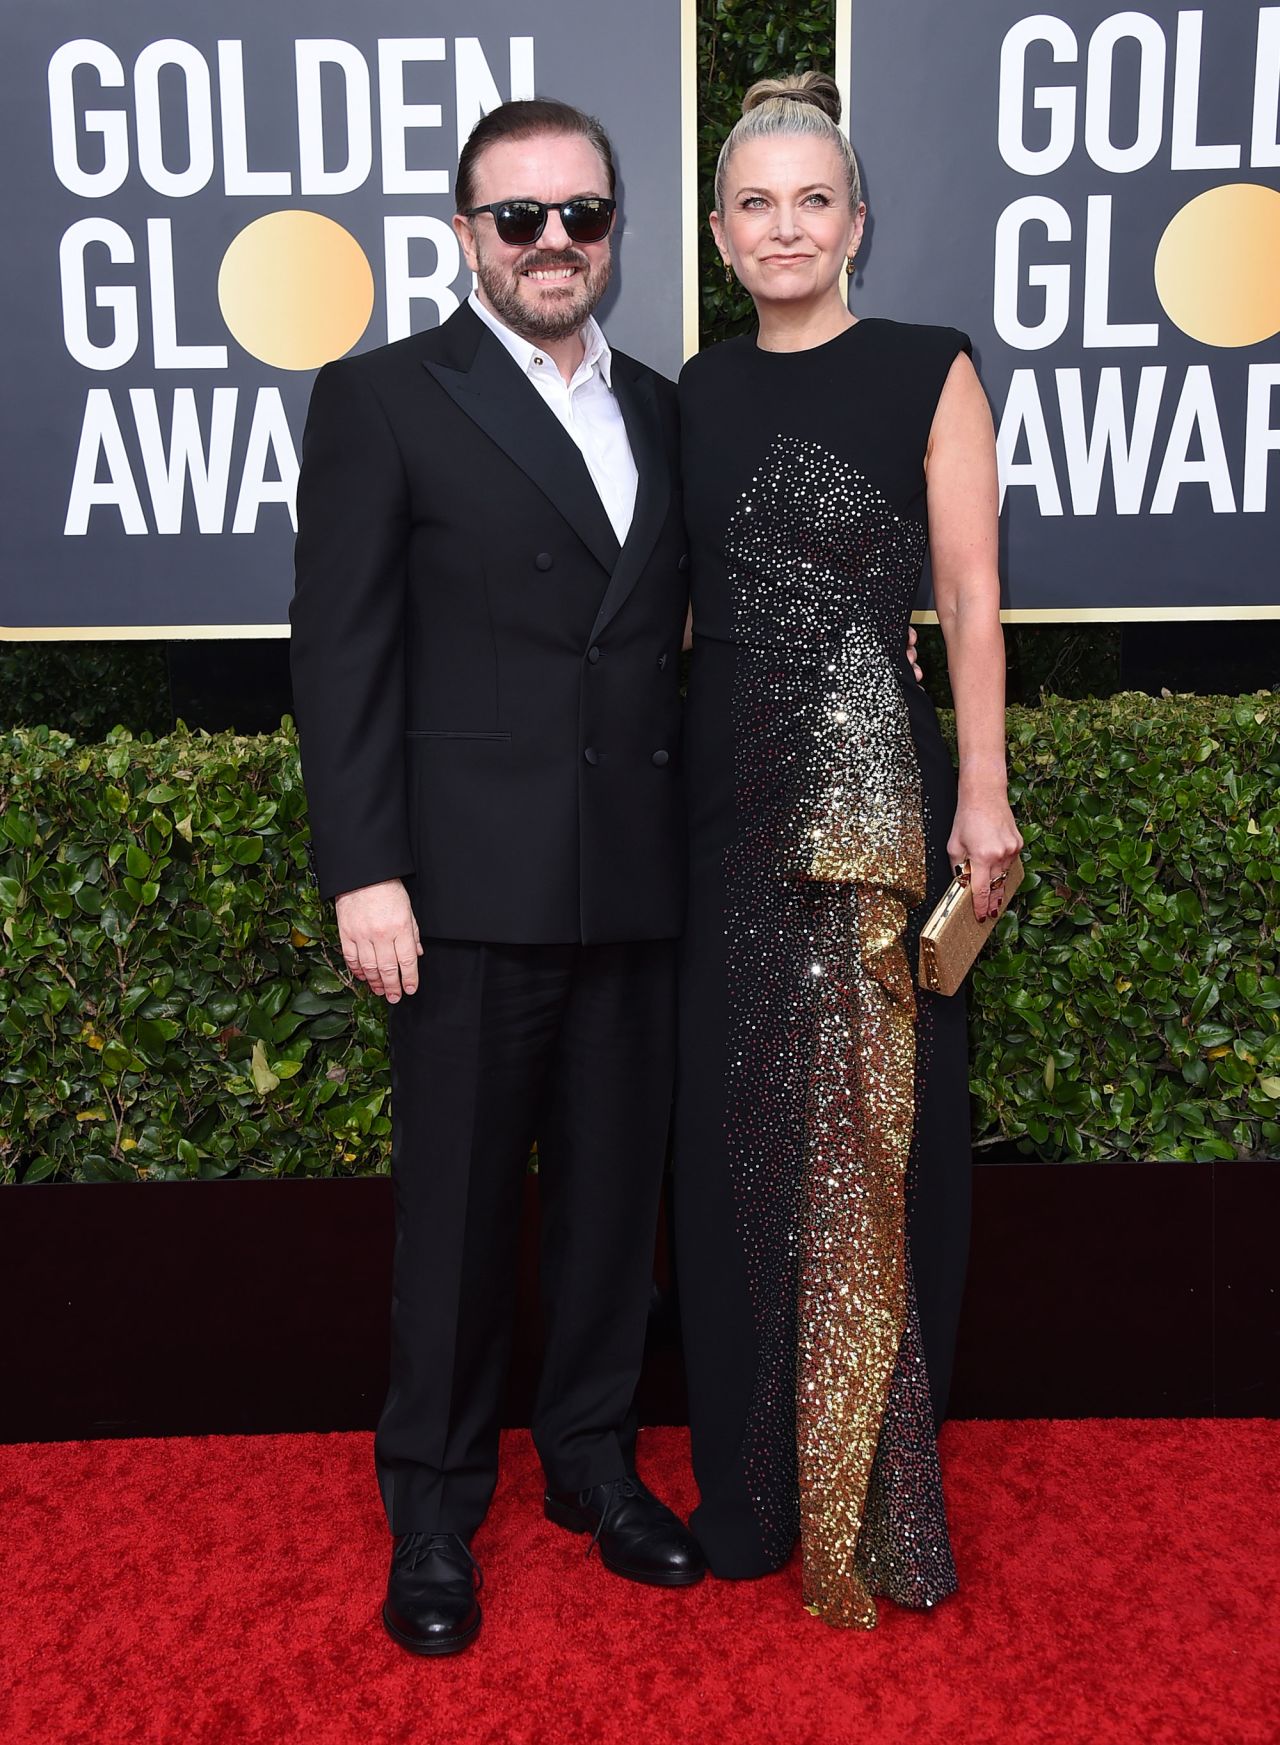 Golden Globes host Ricky Gervais and his partner, Jane Fallon